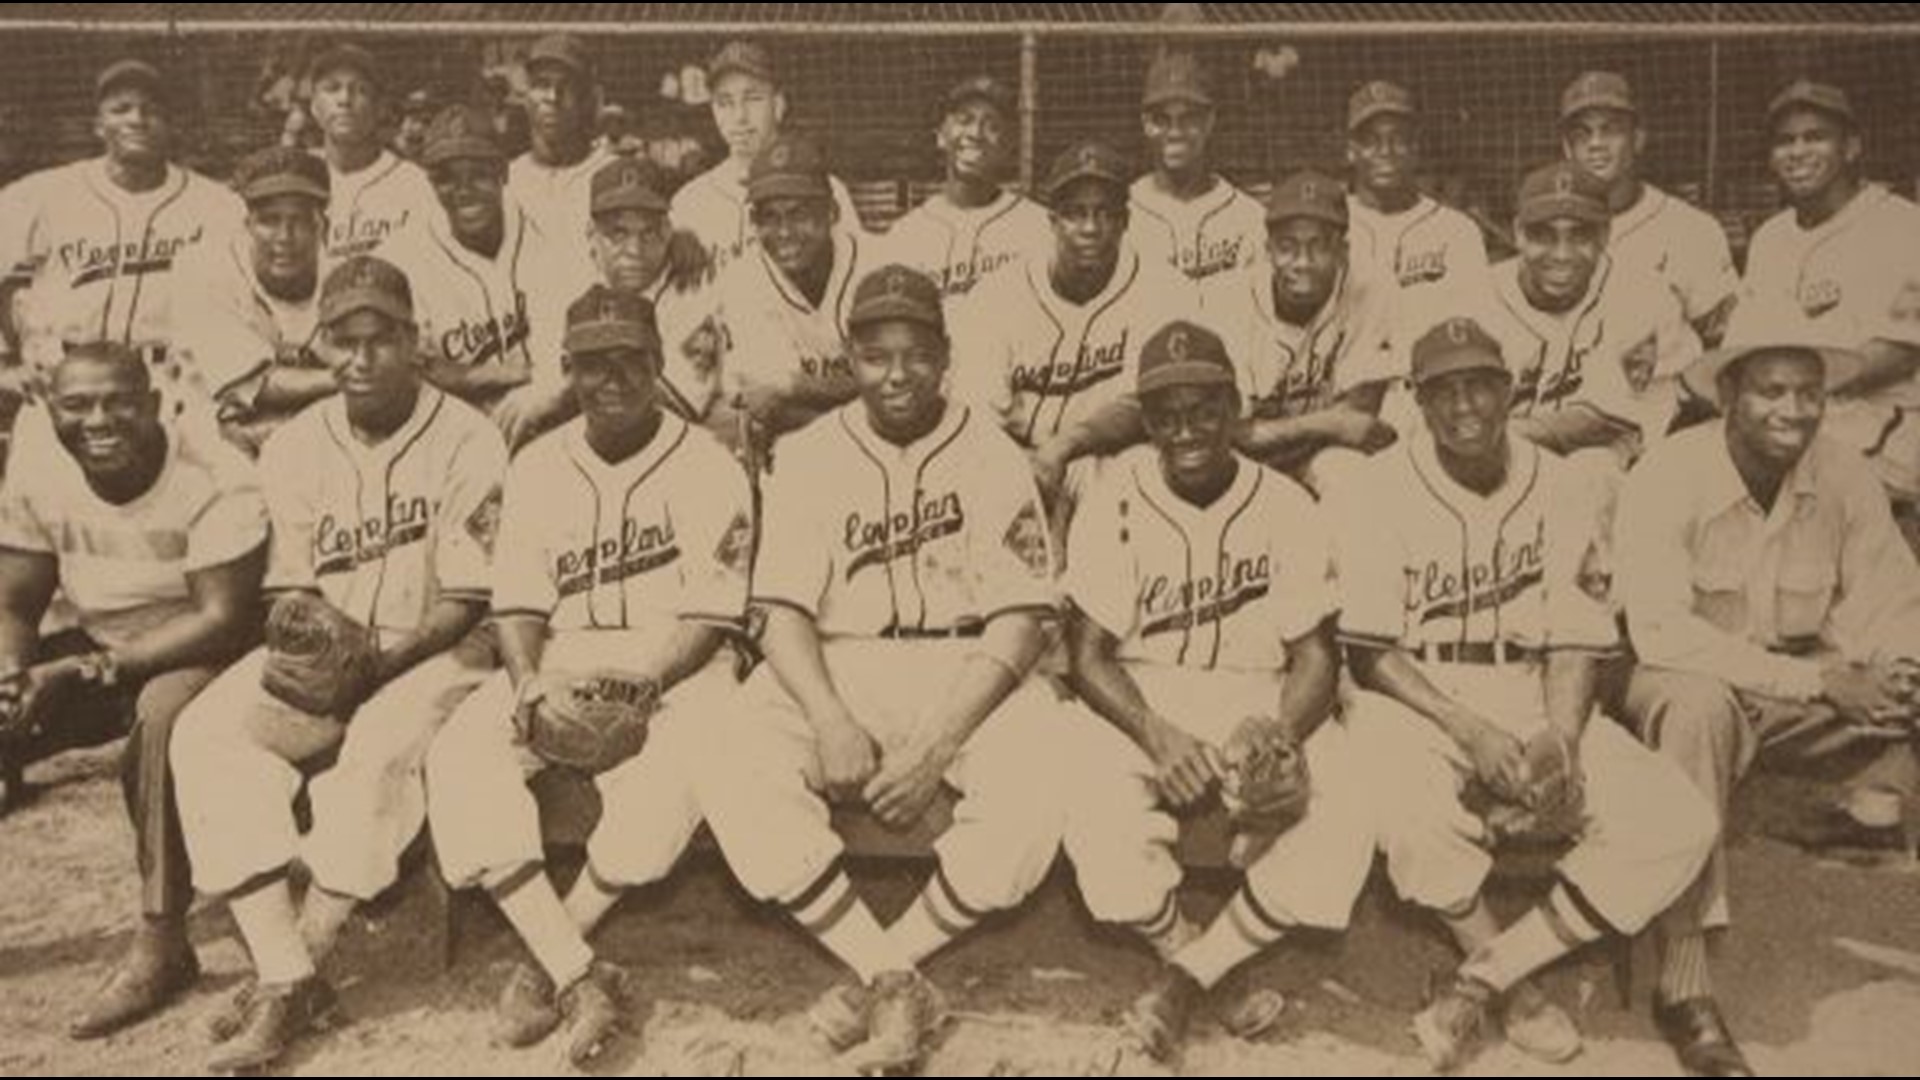 MLB adds Cleveland Buckeyes, Negro Leagues to official records | wkyc.com